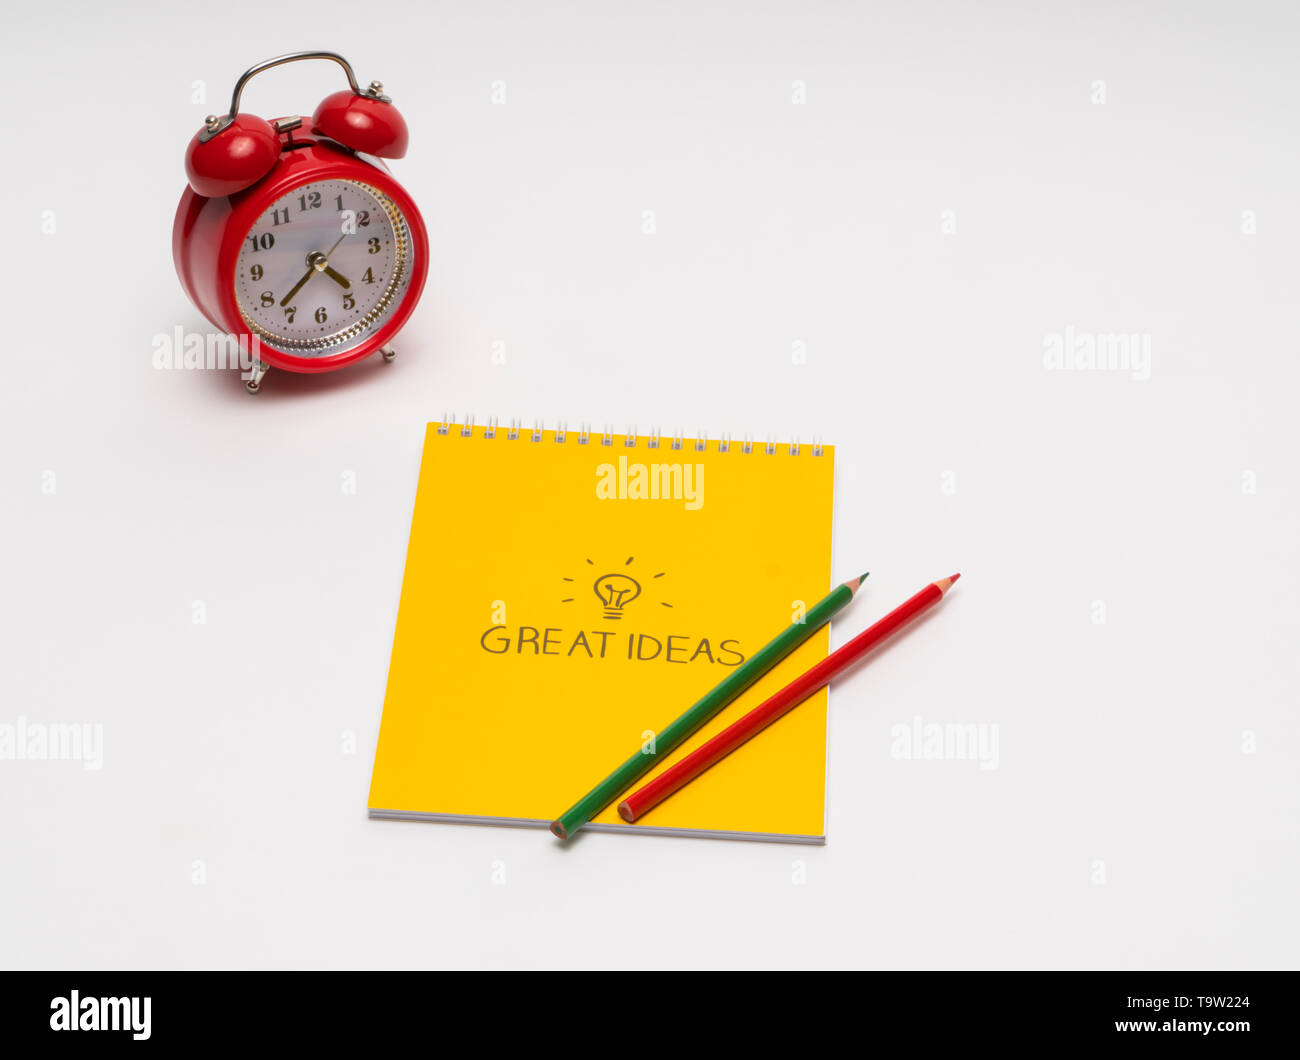 alarm clock with notepad and colored pencils on white background, isolated. back to school. great ideas Stock Photo